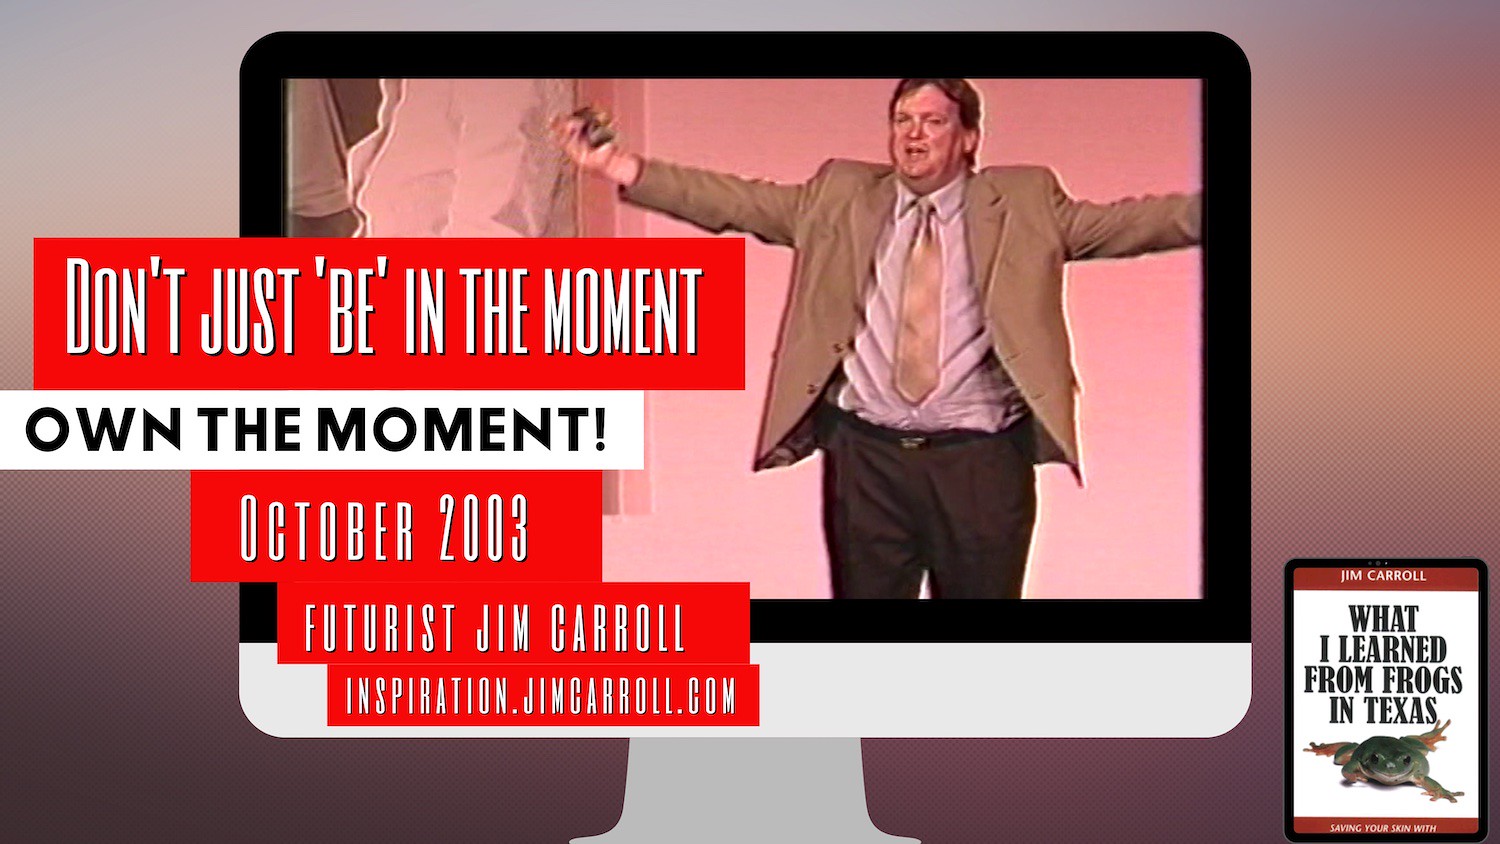 "Don't just 'be' in the moment. Own the moment!" - Futurist Jim Carroll